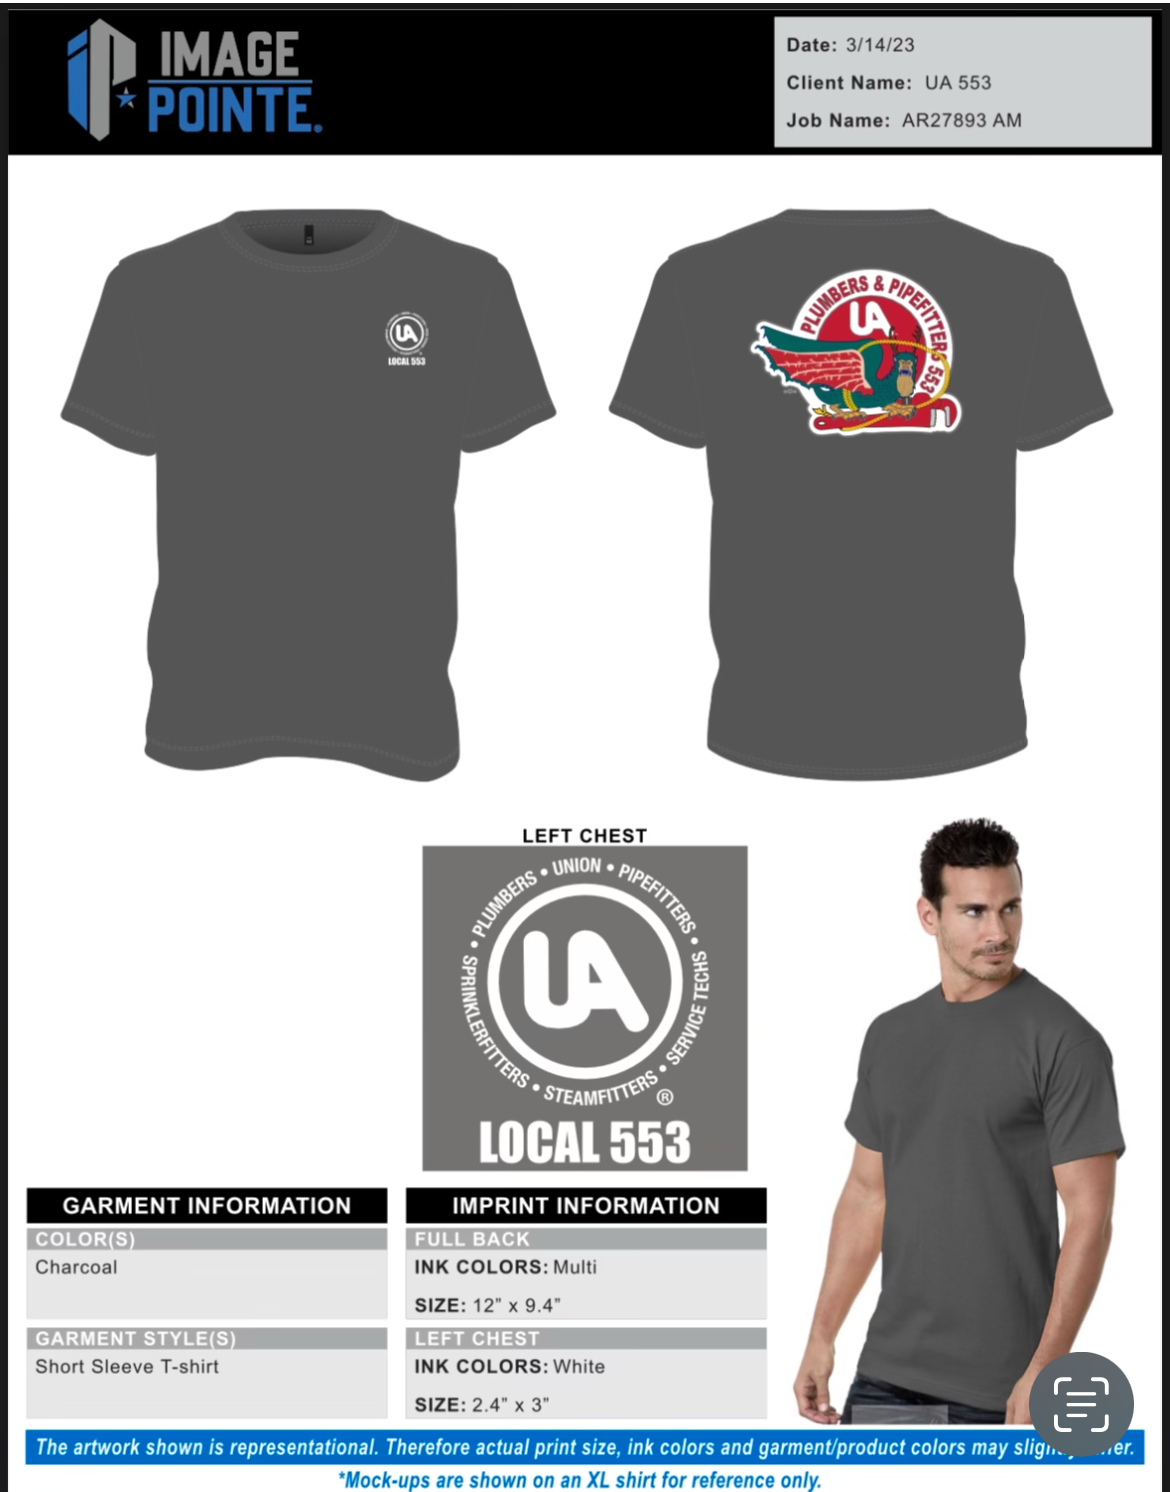 https://ualocal553.org/wp-content/uploads/2023/04/tshirt.png